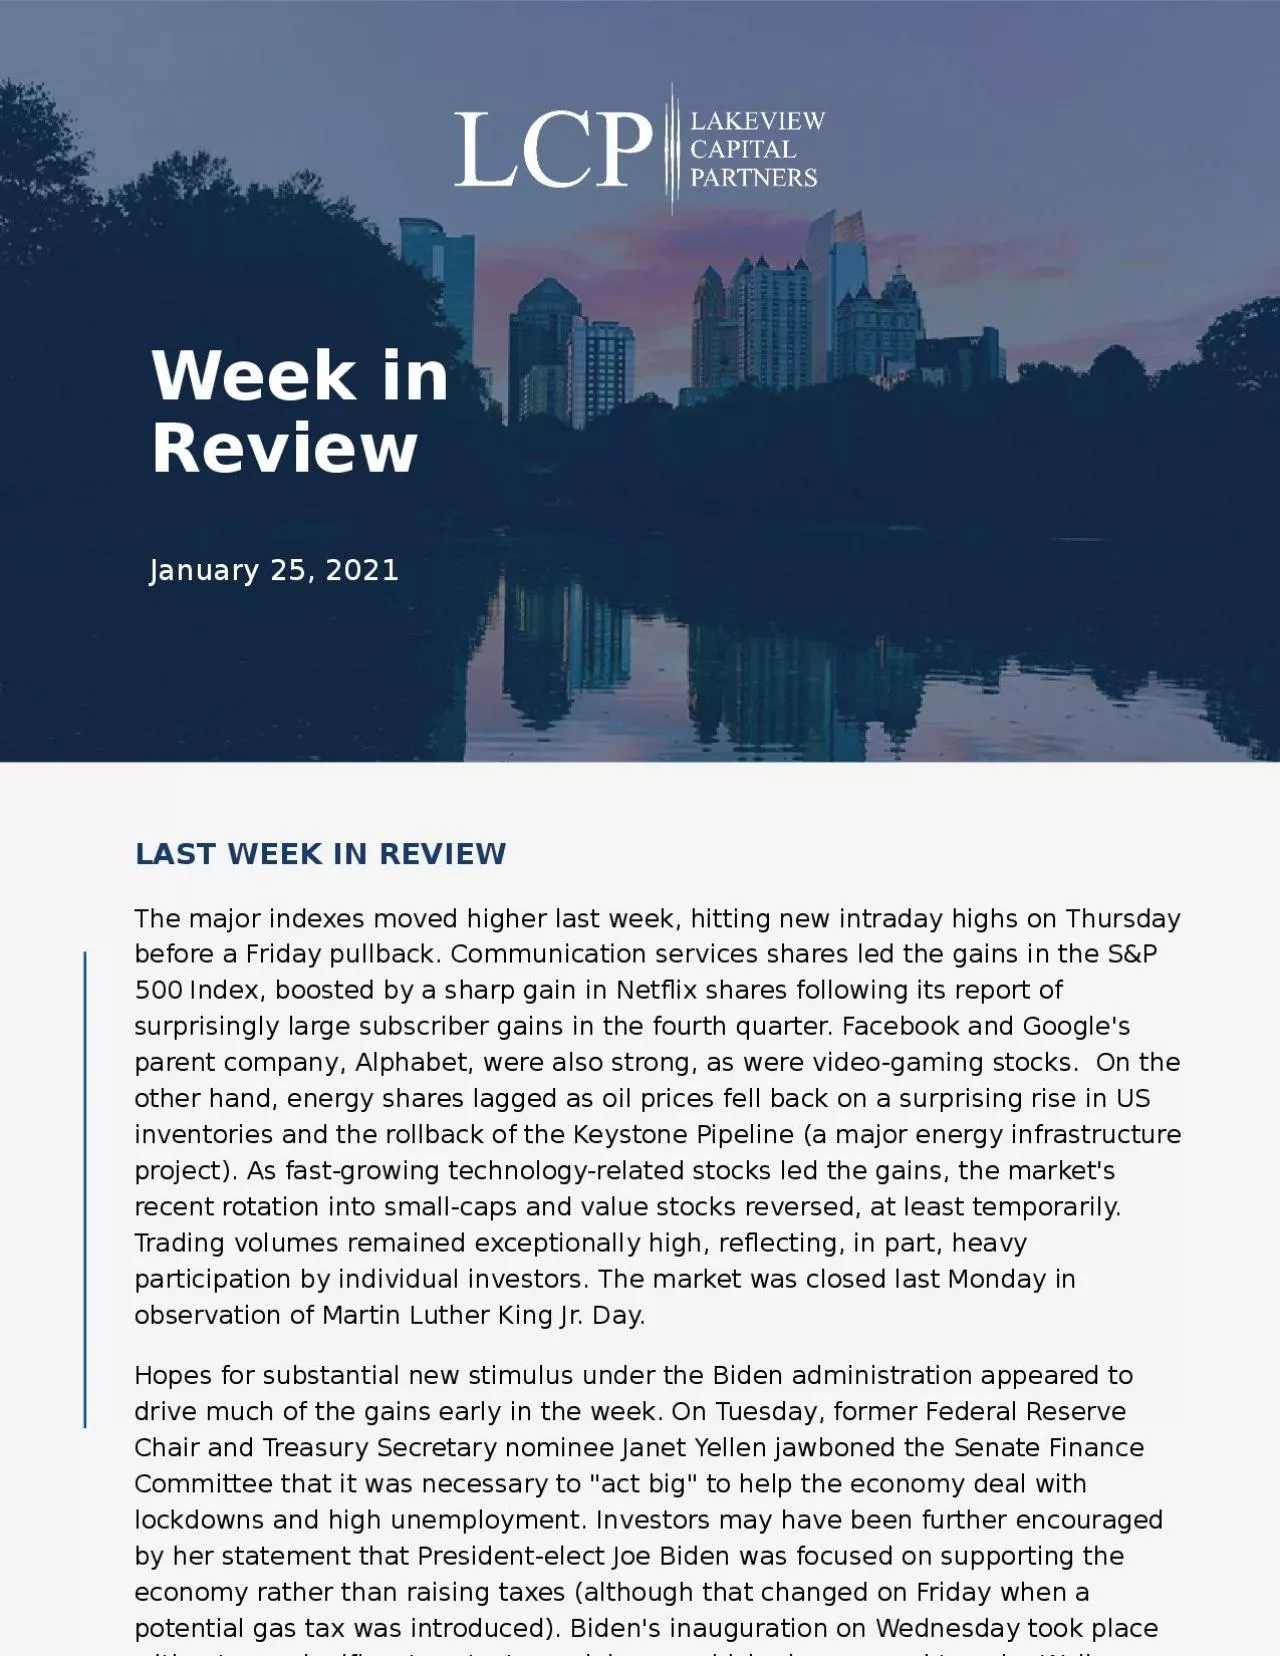 Week in Review January 25, 2021